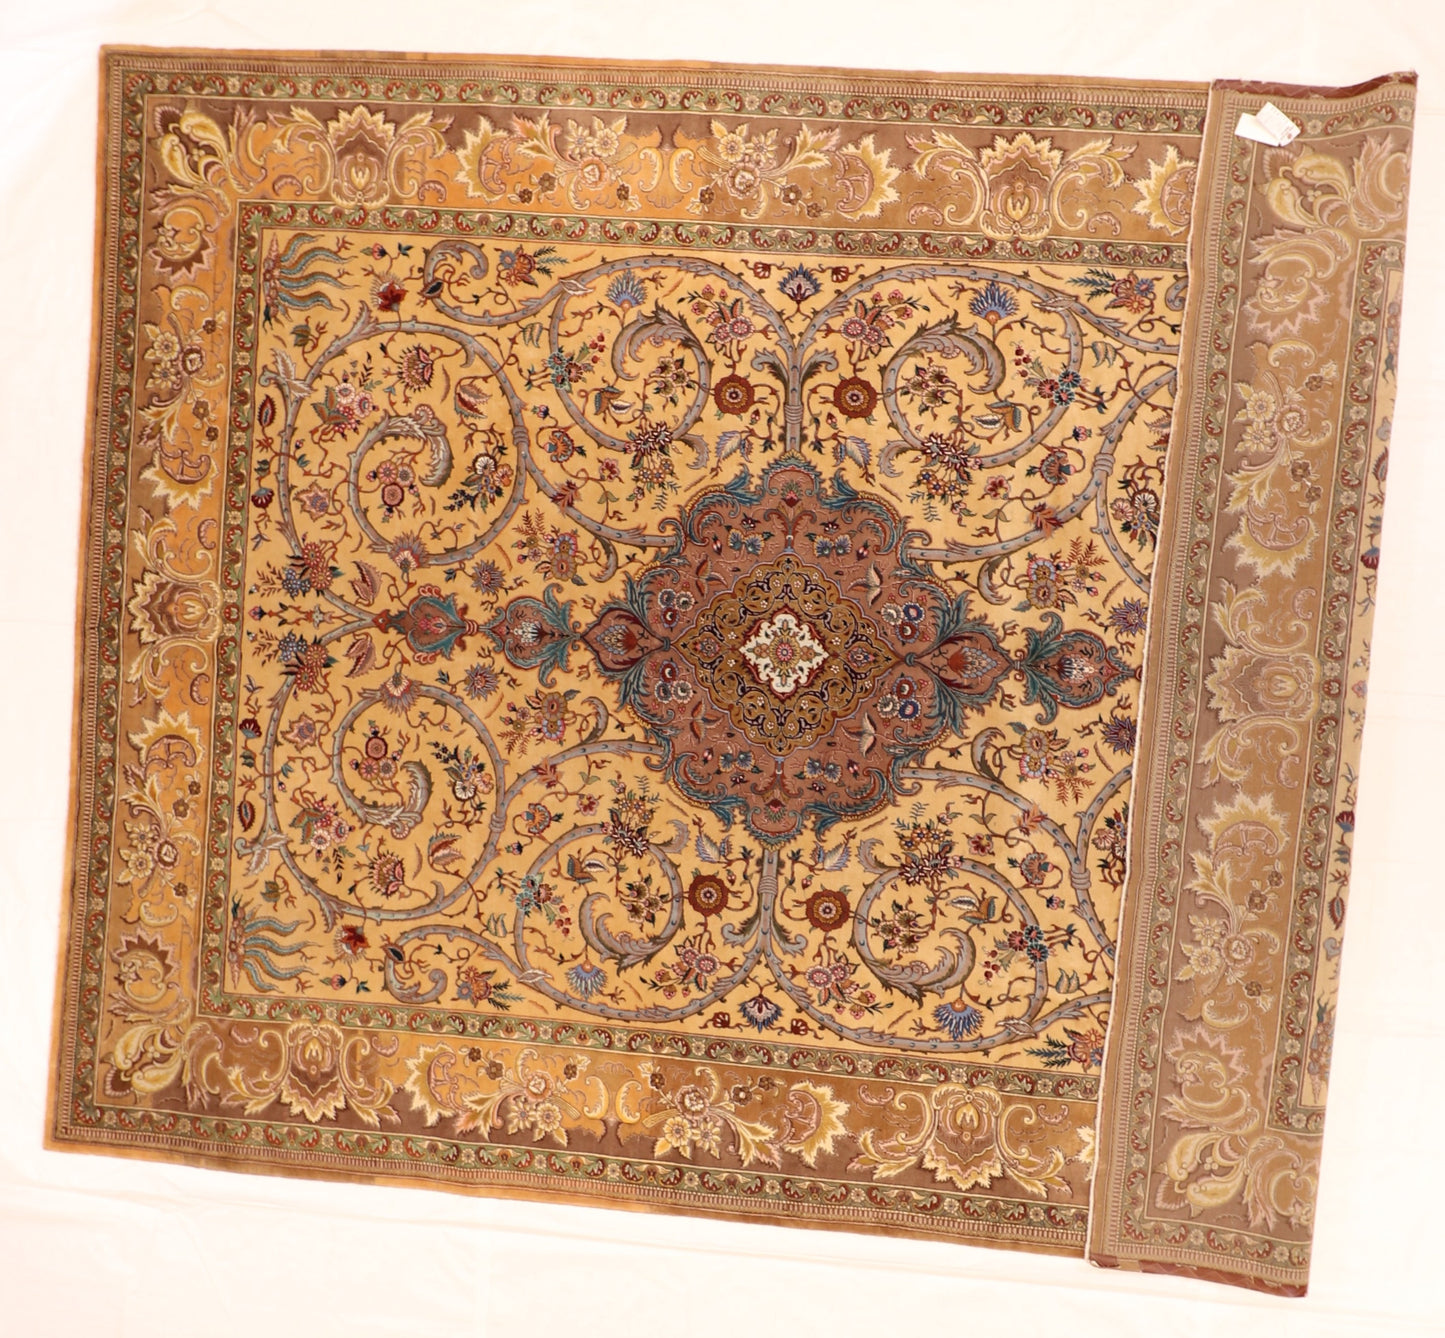 10x13 - Tabriz Fine Floral Rectangle - Hand Knotted Rug